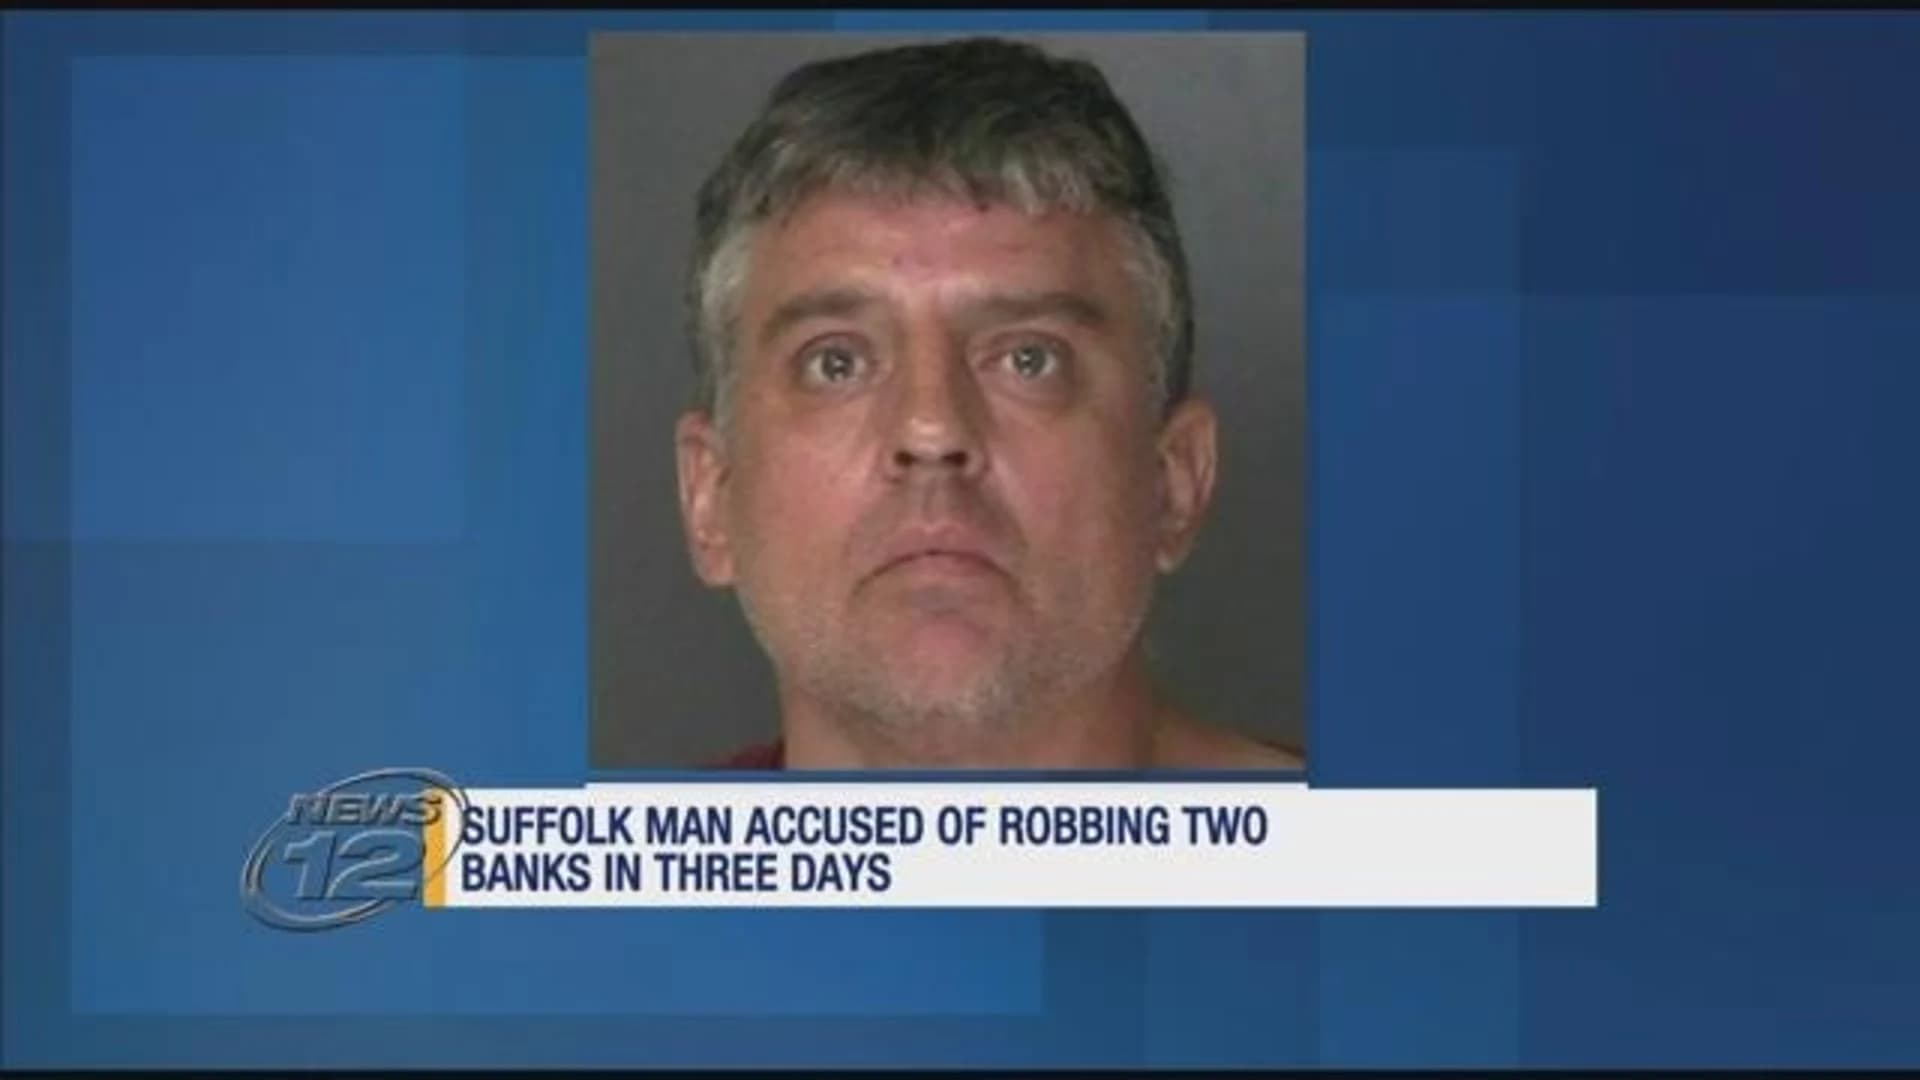 Suffolk man accused of robbing 2 banks in 3 days